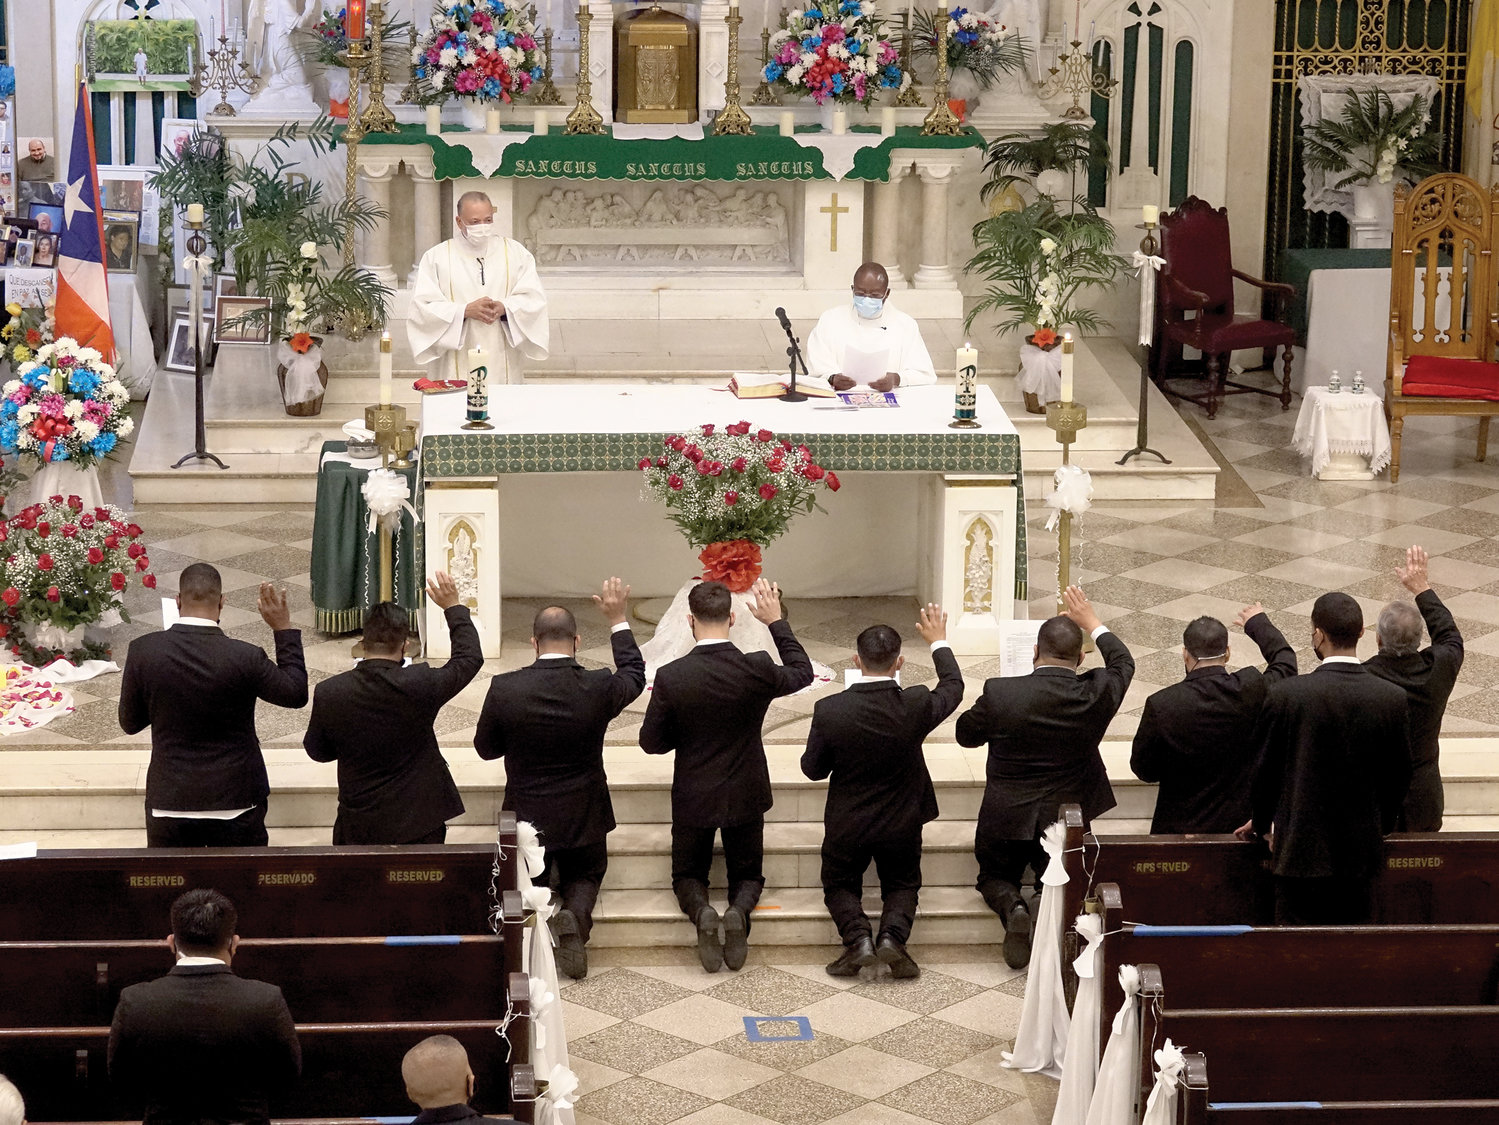 New members kneel in front of the altar as they are inducted into the Holy Name Society at the conclusion of the Mass.